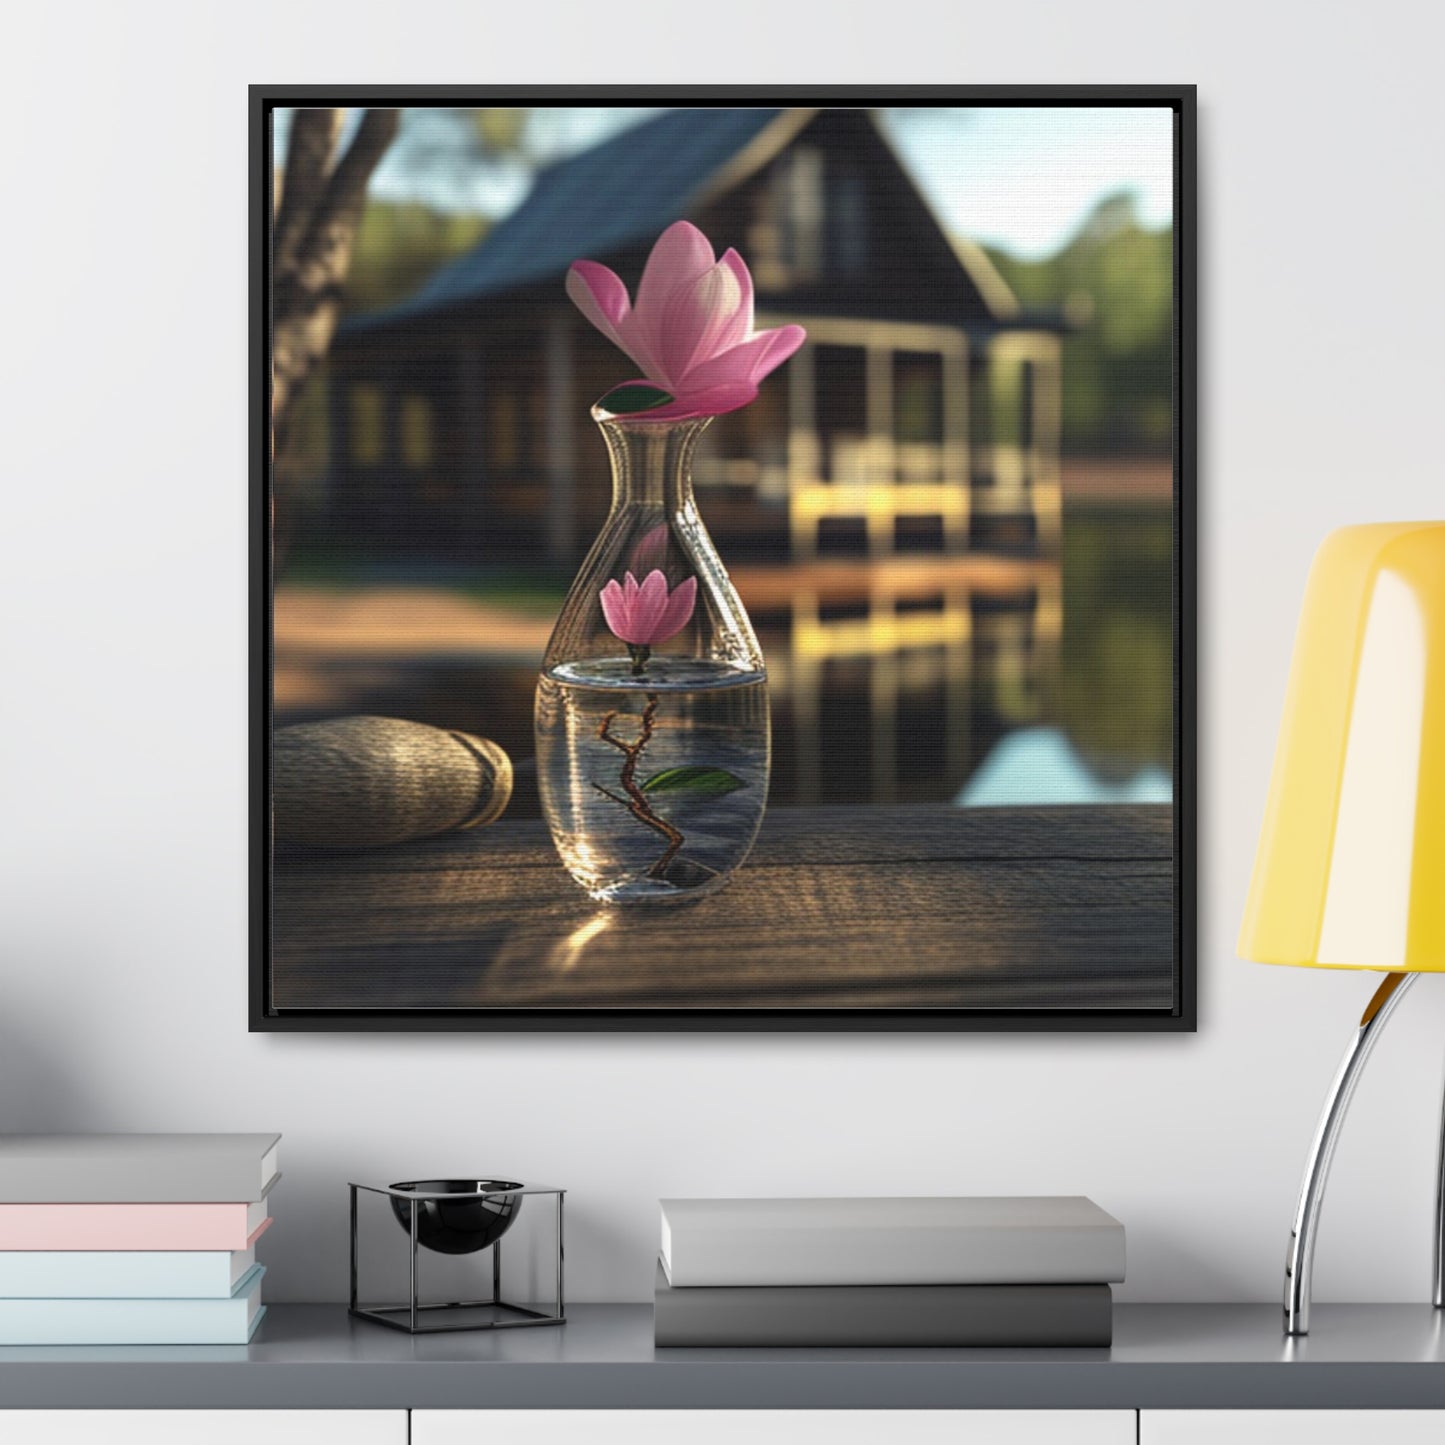 Gallery Canvas Wraps, Square Frame Magnolia in a Glass vase 4